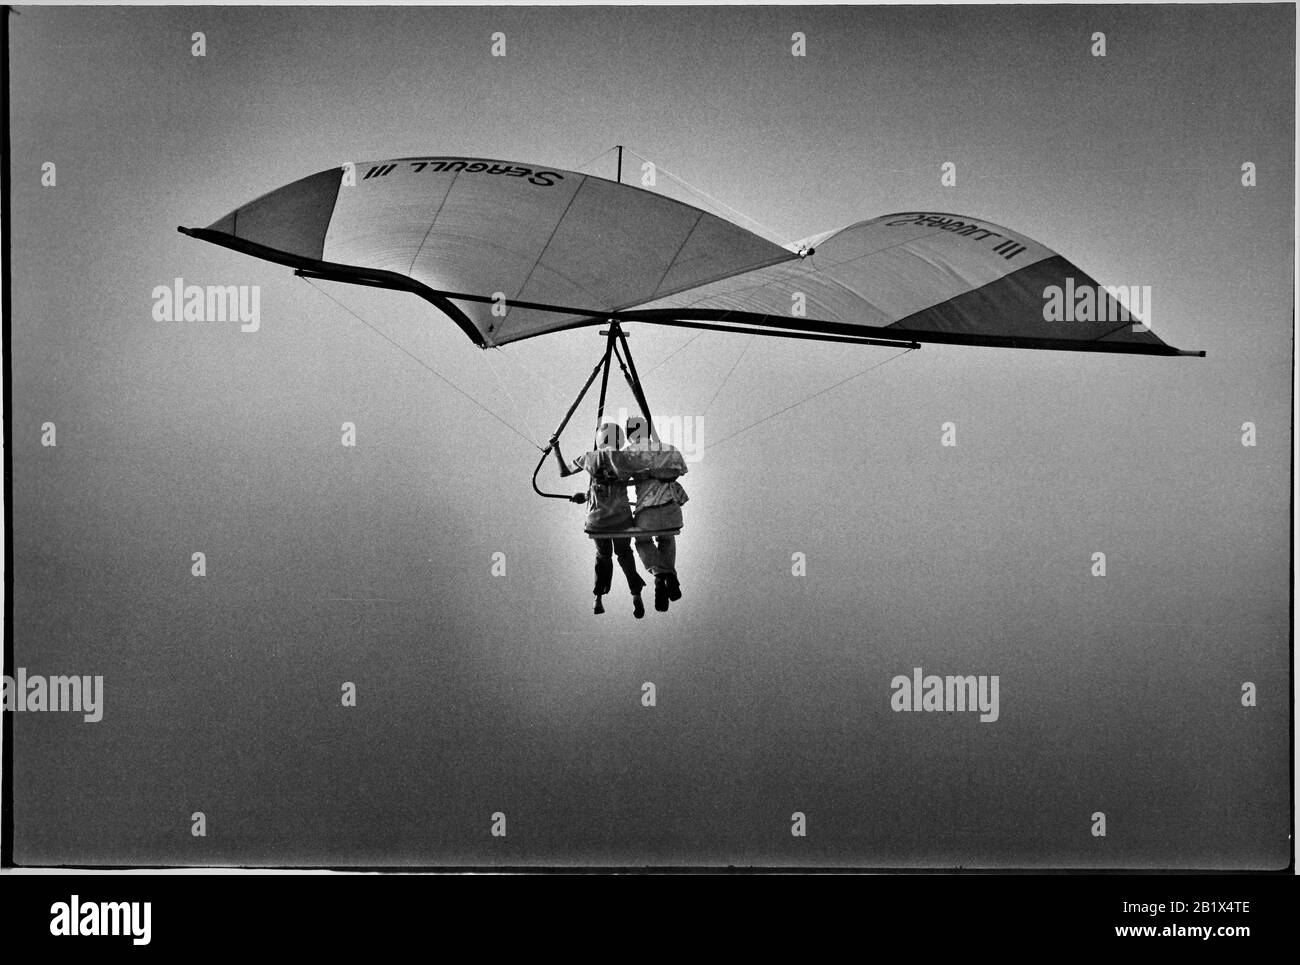 man pilot and his passenger girlfriend on a 1970's hang glider together over the ocean in San Pedro CA USA at altitude Stock Photo